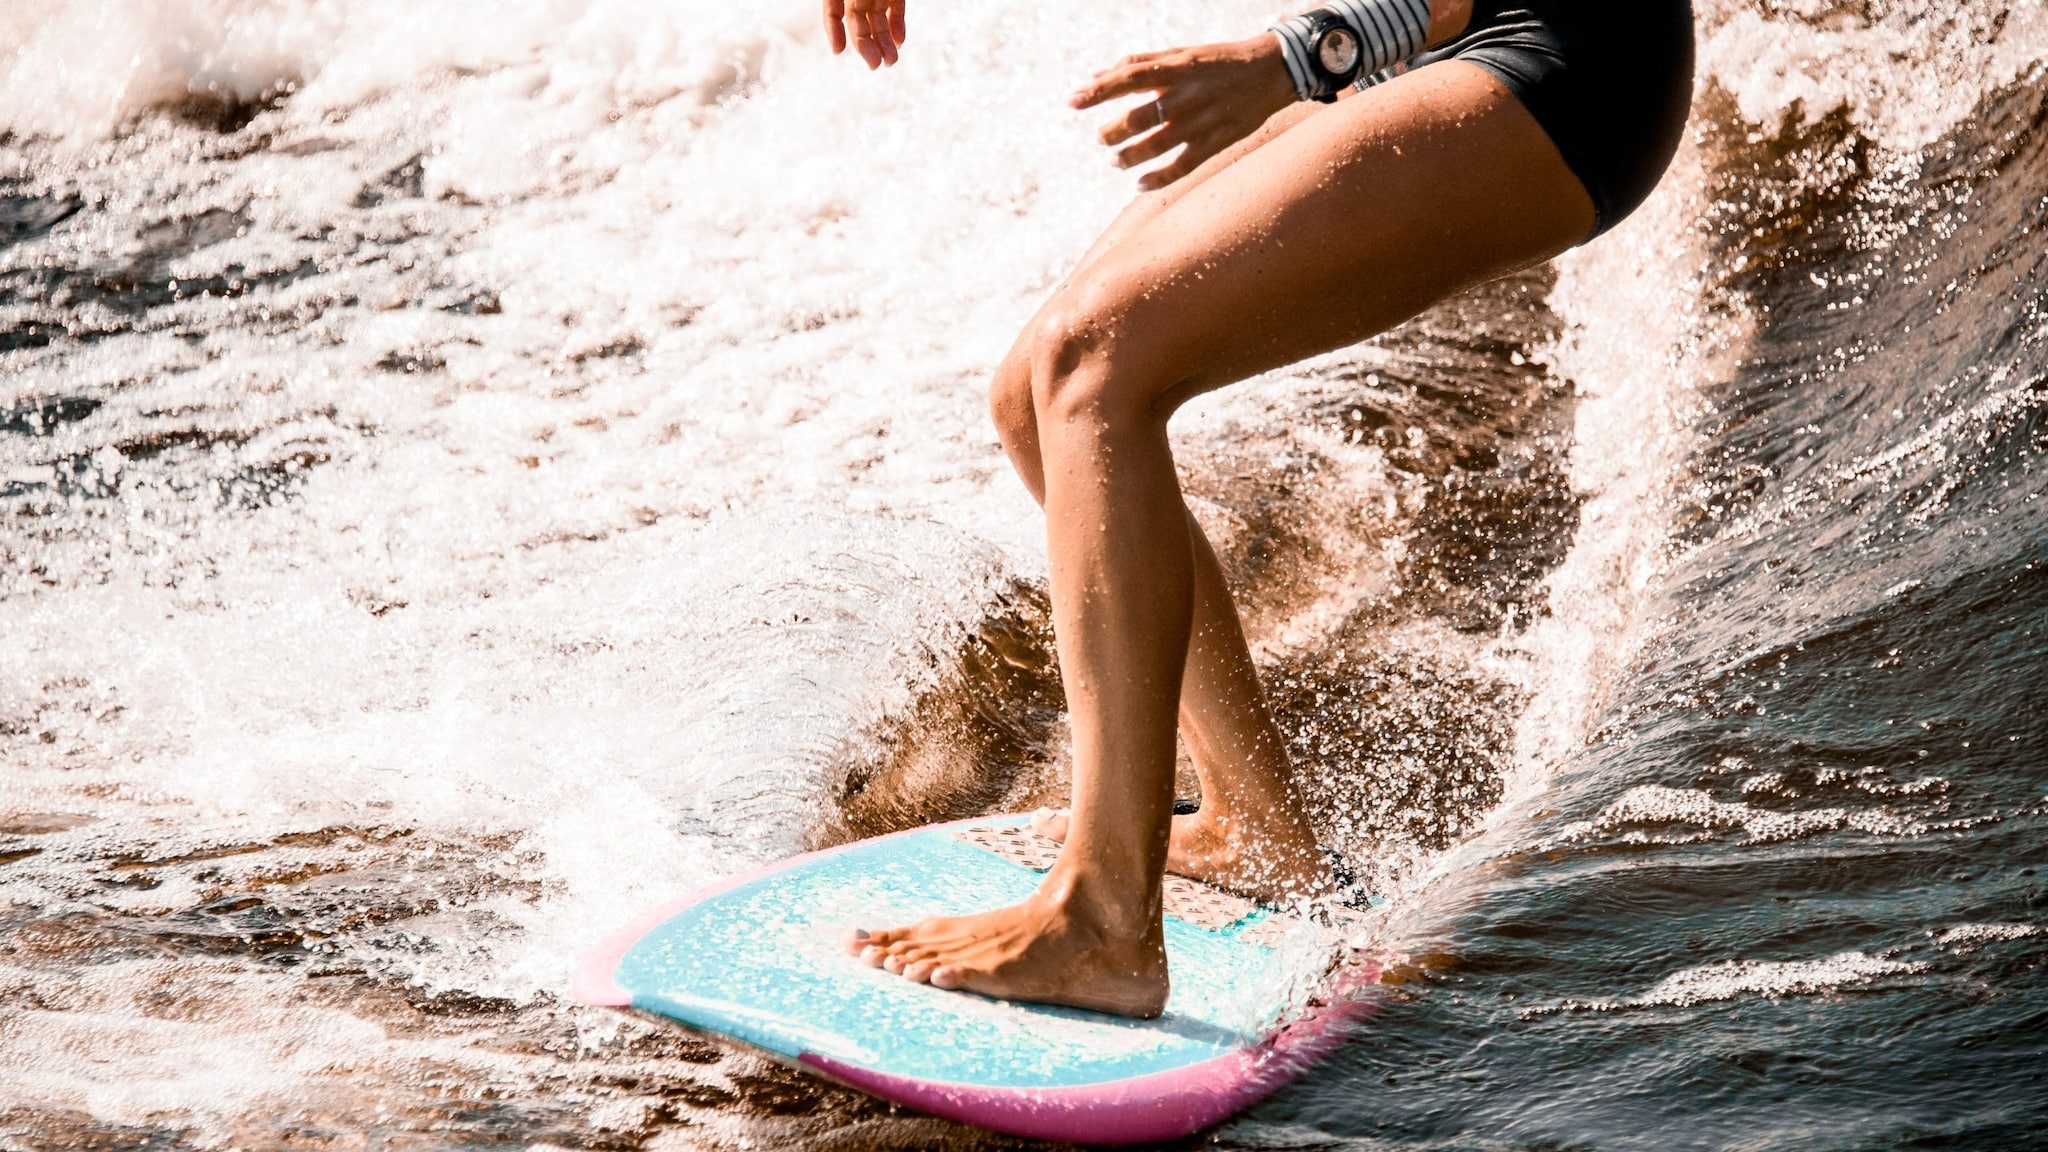 A close up picture of the legs of a person surfing with water spray behind their surfboard.